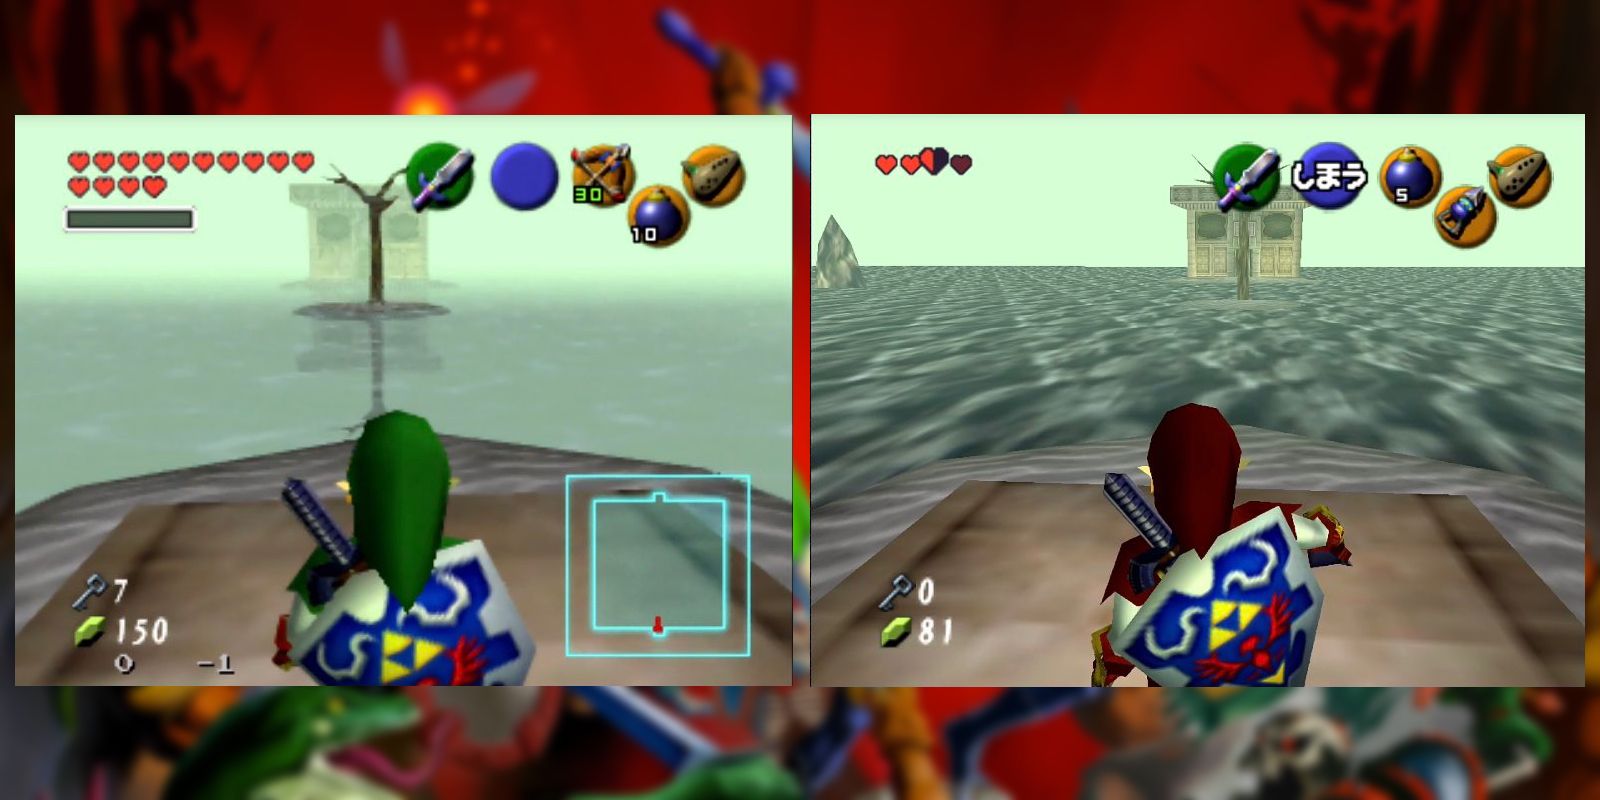 Screenshots comparing the N64 and Switch versions of Ocarina of Time